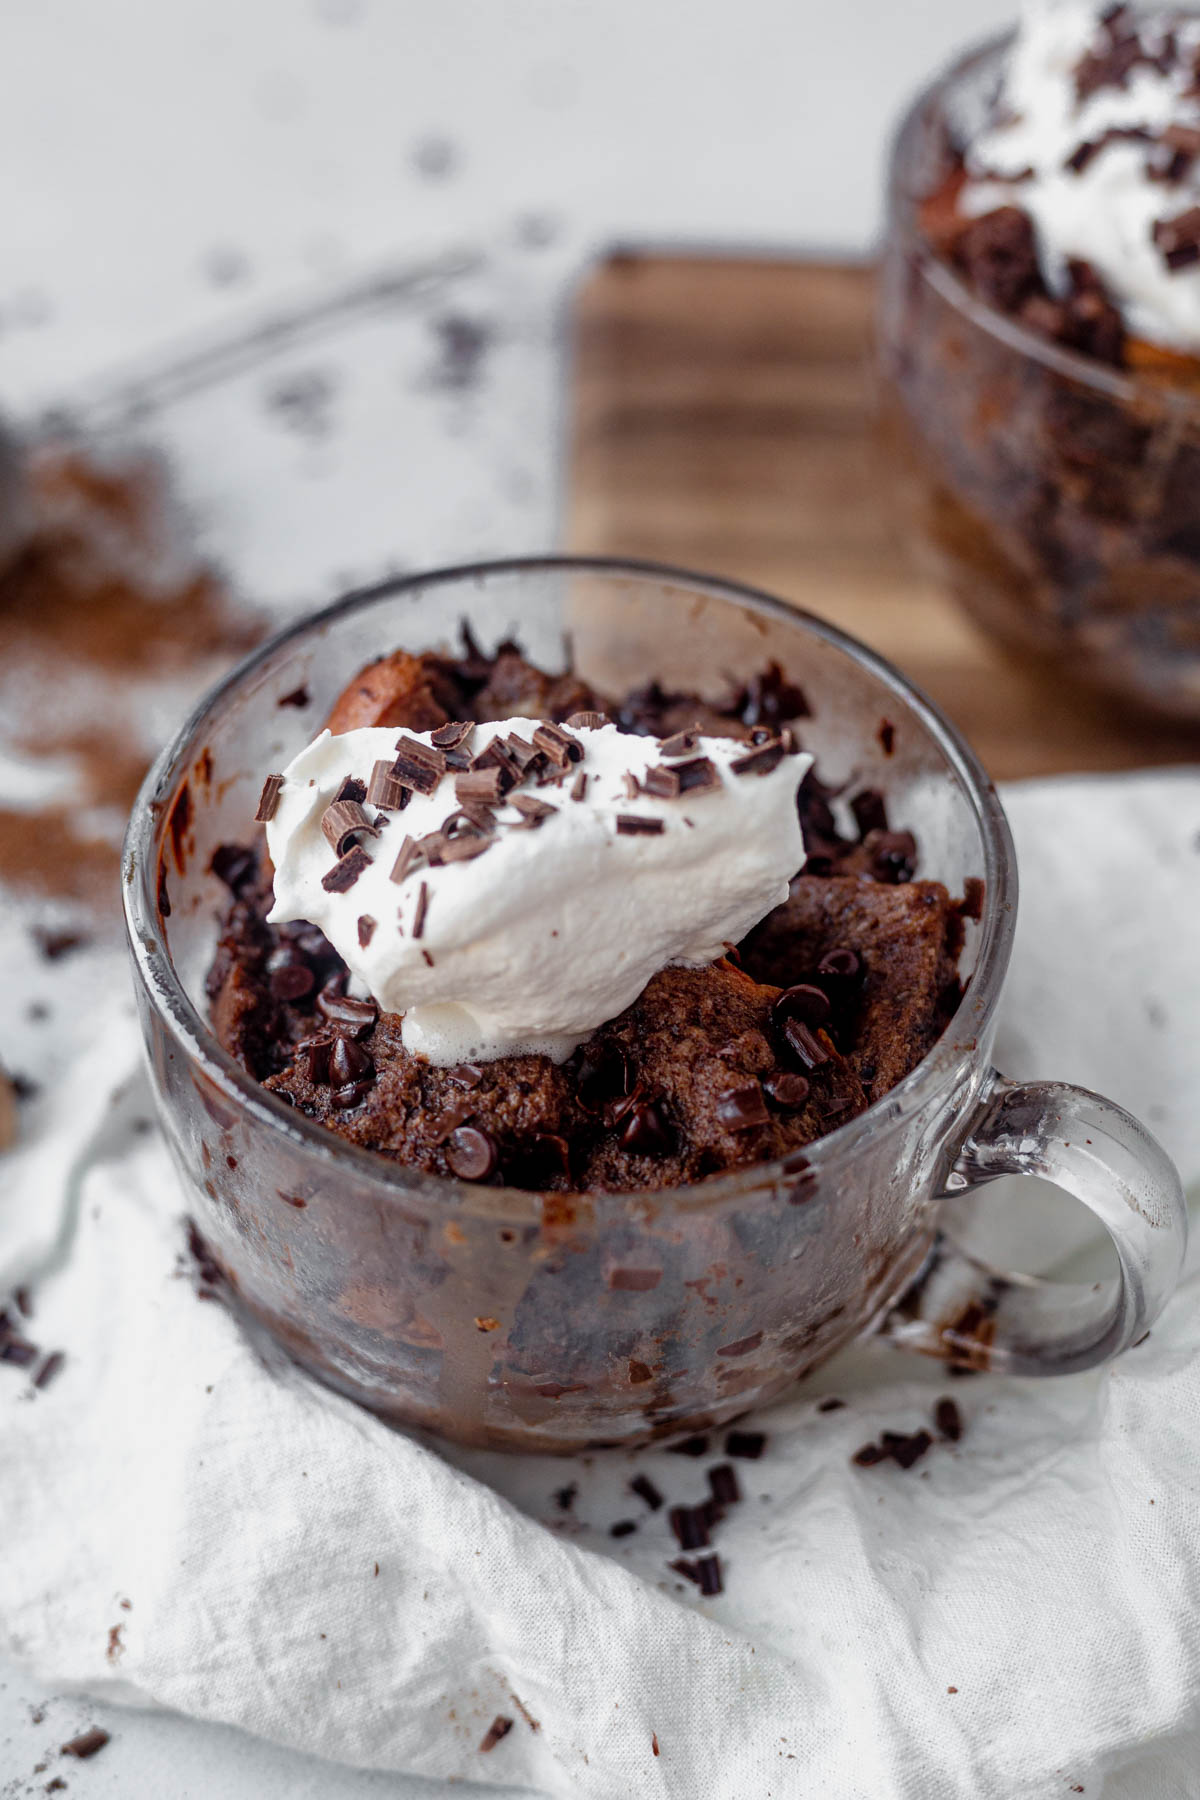 microwave bread pudding in a mug with whipped cream and chocolate